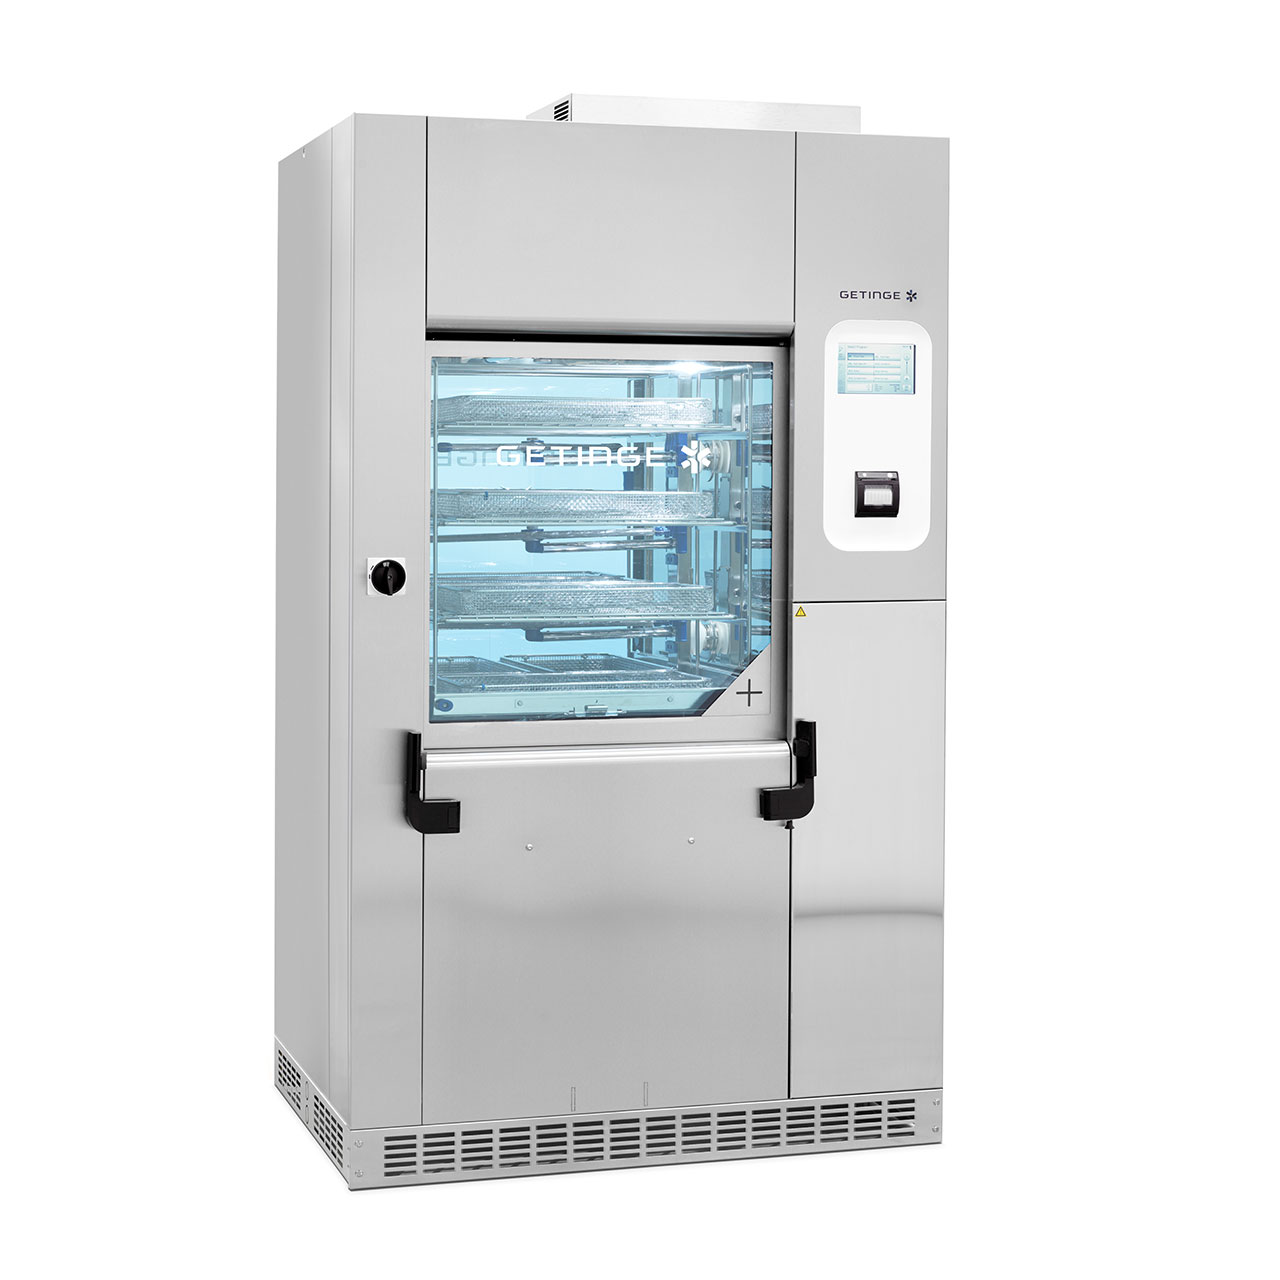 A smarter of washer-disinfector for high-throughput reprocessing